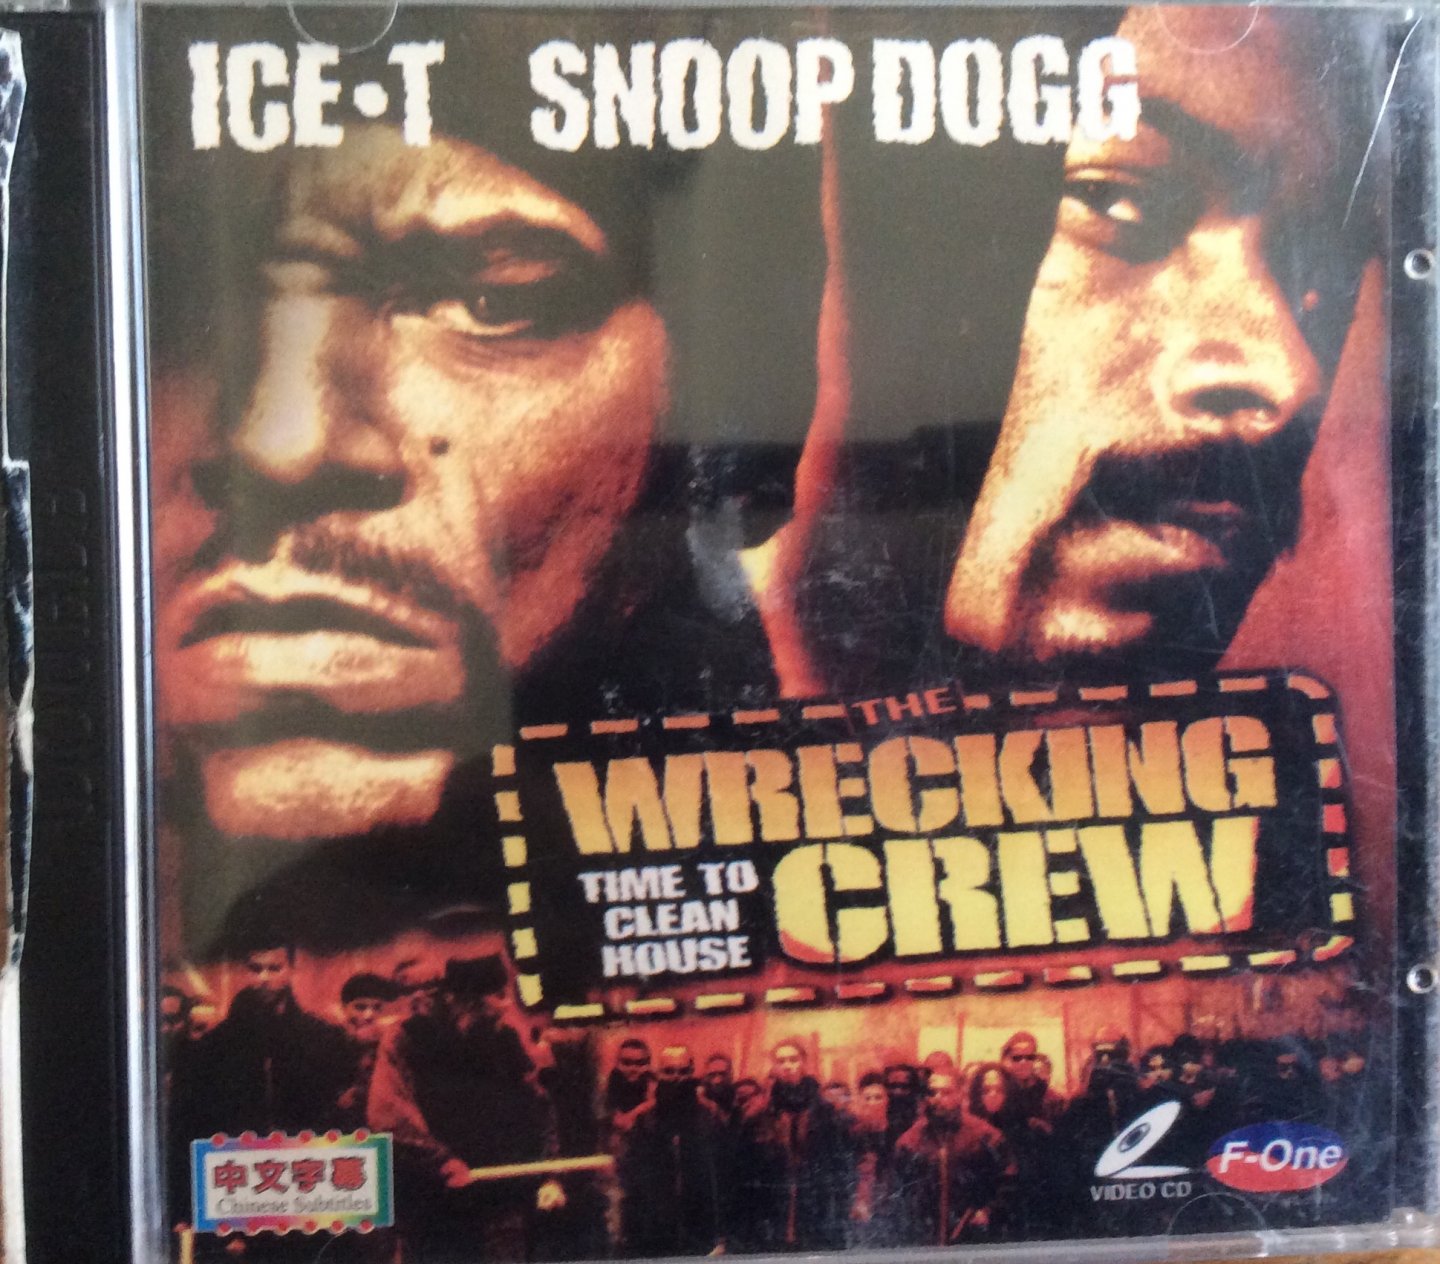 the Wrecking Crew, Ice-T, Snoop Dogg - Time to clean house.